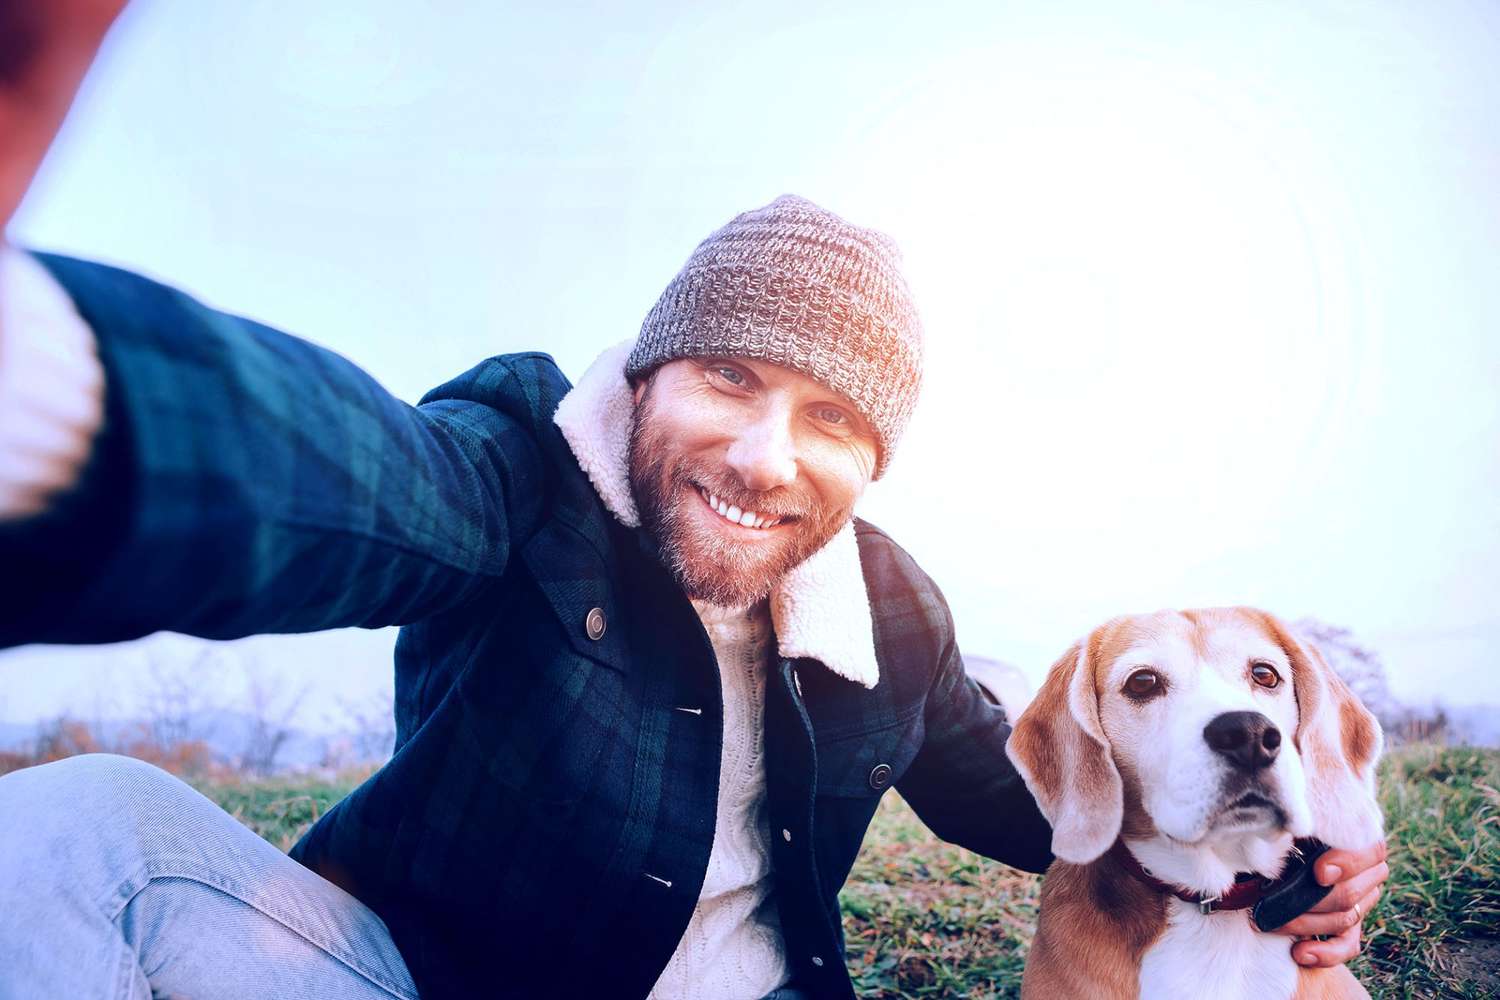 man taking a selfie outdoors with his dog